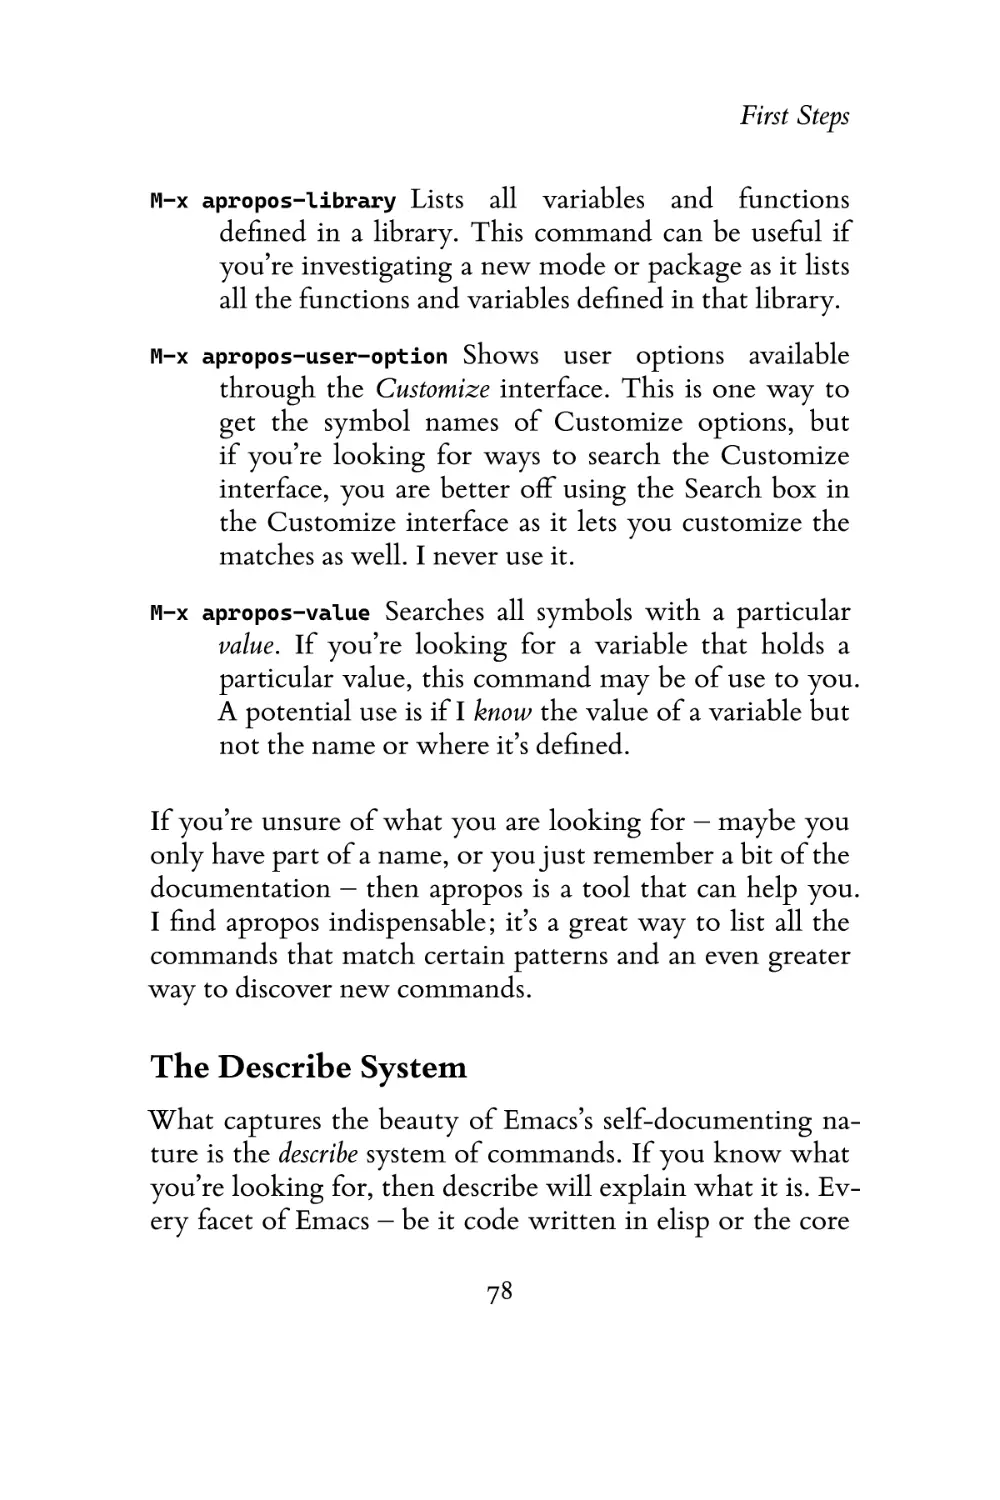 The Describe System